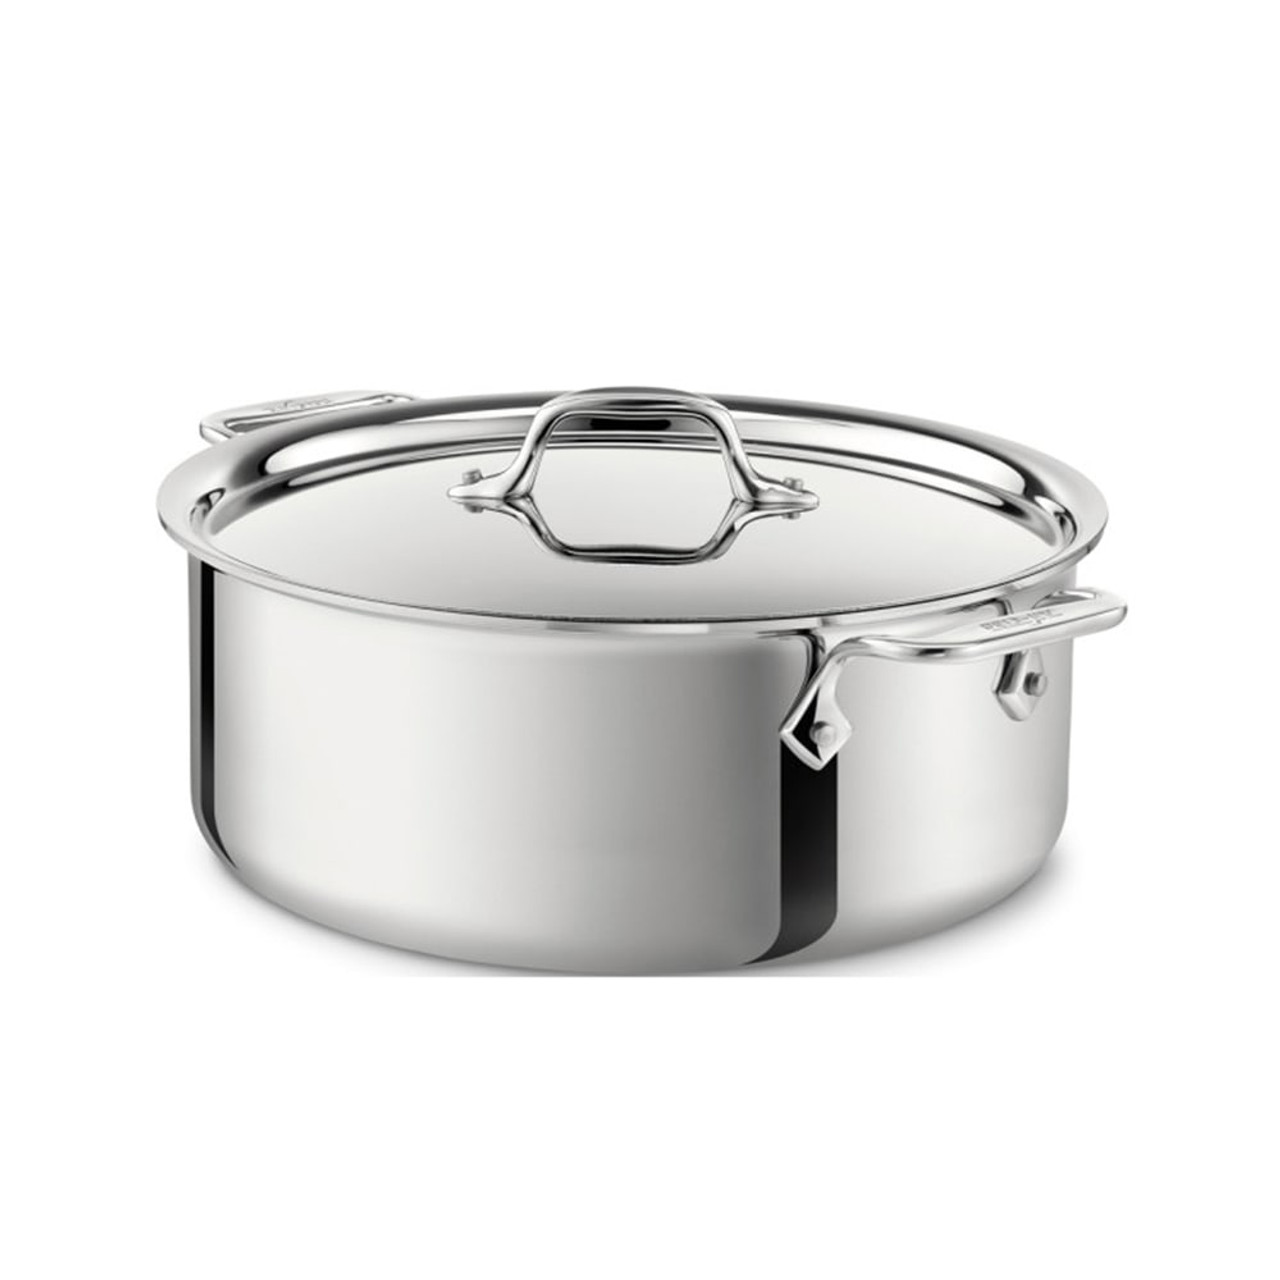 https://cdn11.bigcommerce.com/s-hccytny0od/images/stencil/1280x1280/products/501/1880/all-clad-stainless-steel-stock-pot-6qt__61658.1510968552.jpg?c=2?imbypass=on